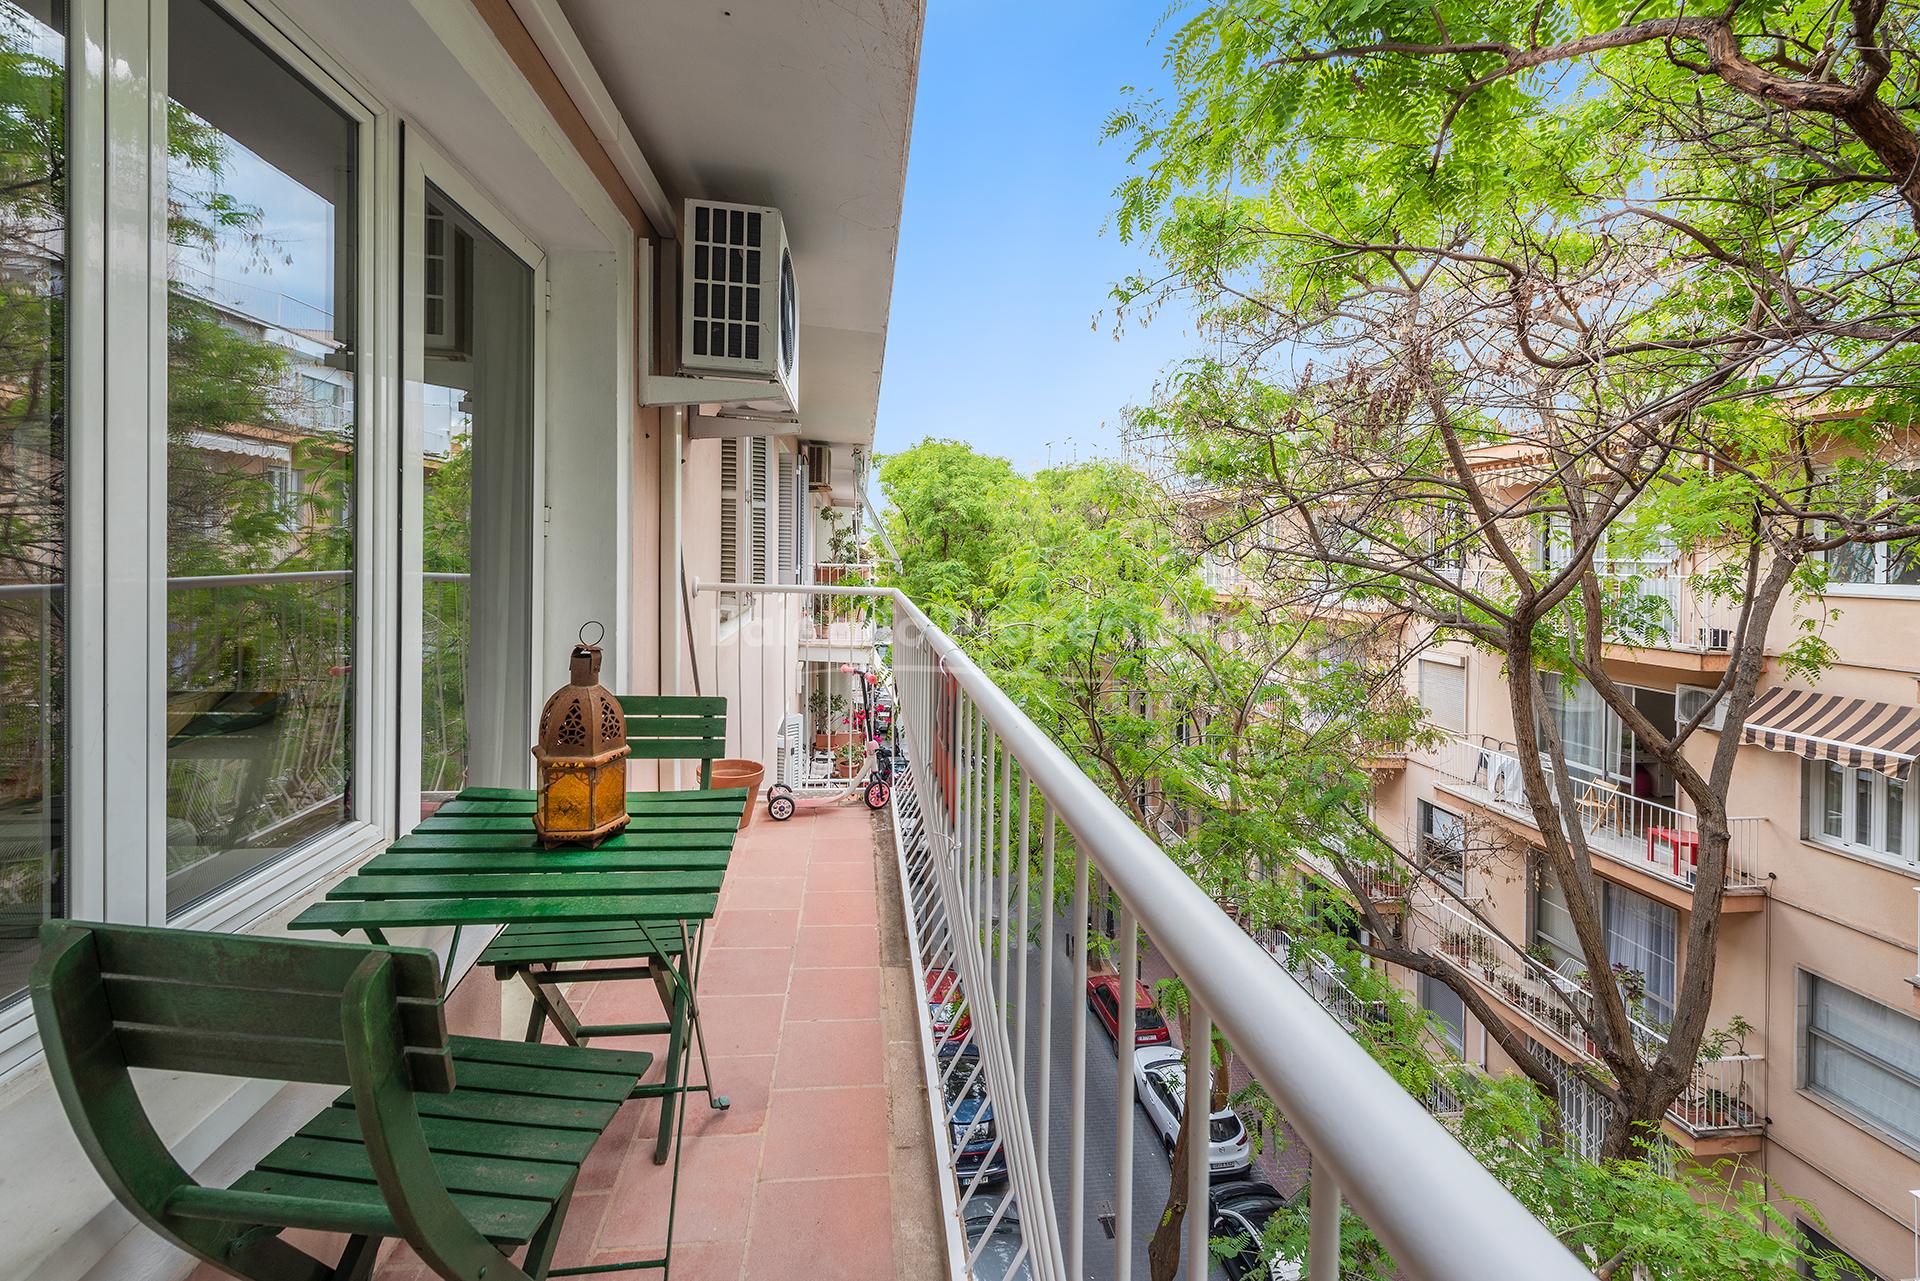 Renovated apartment with balconies for sale in the heart of Palma, Mallorca